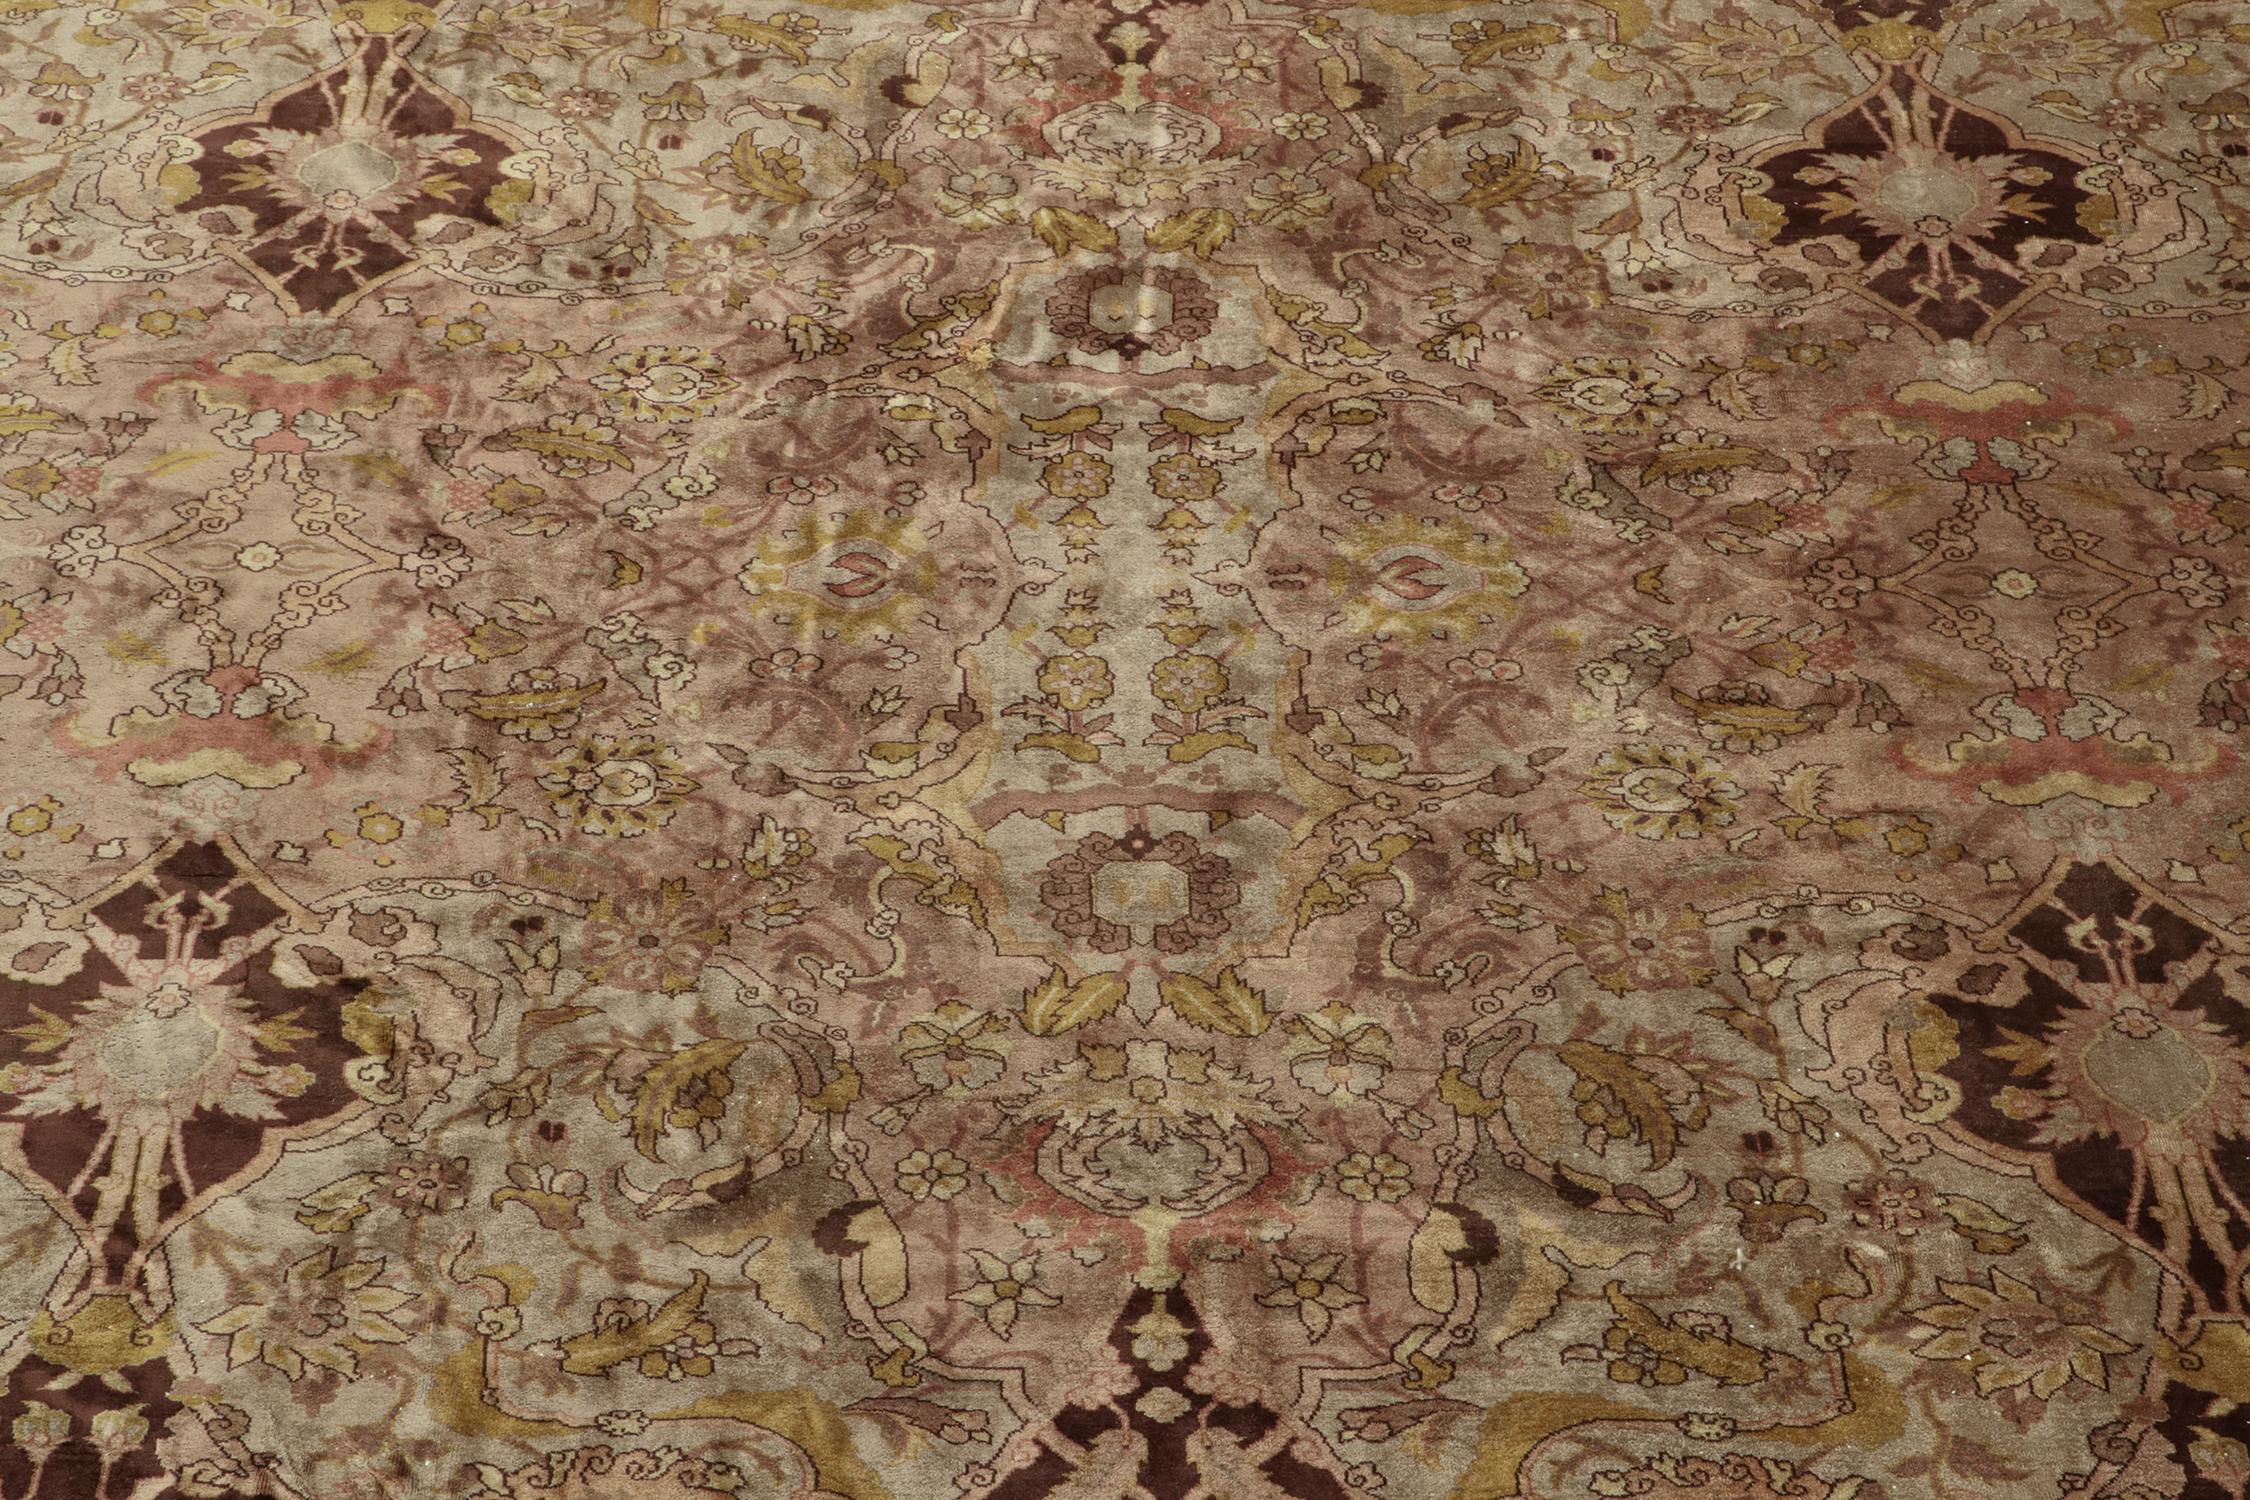 Antique Polonaise Palace Rug in Pink, Beige-Brown and Gold Floral Pattern In Good Condition For Sale In Long Island City, NY